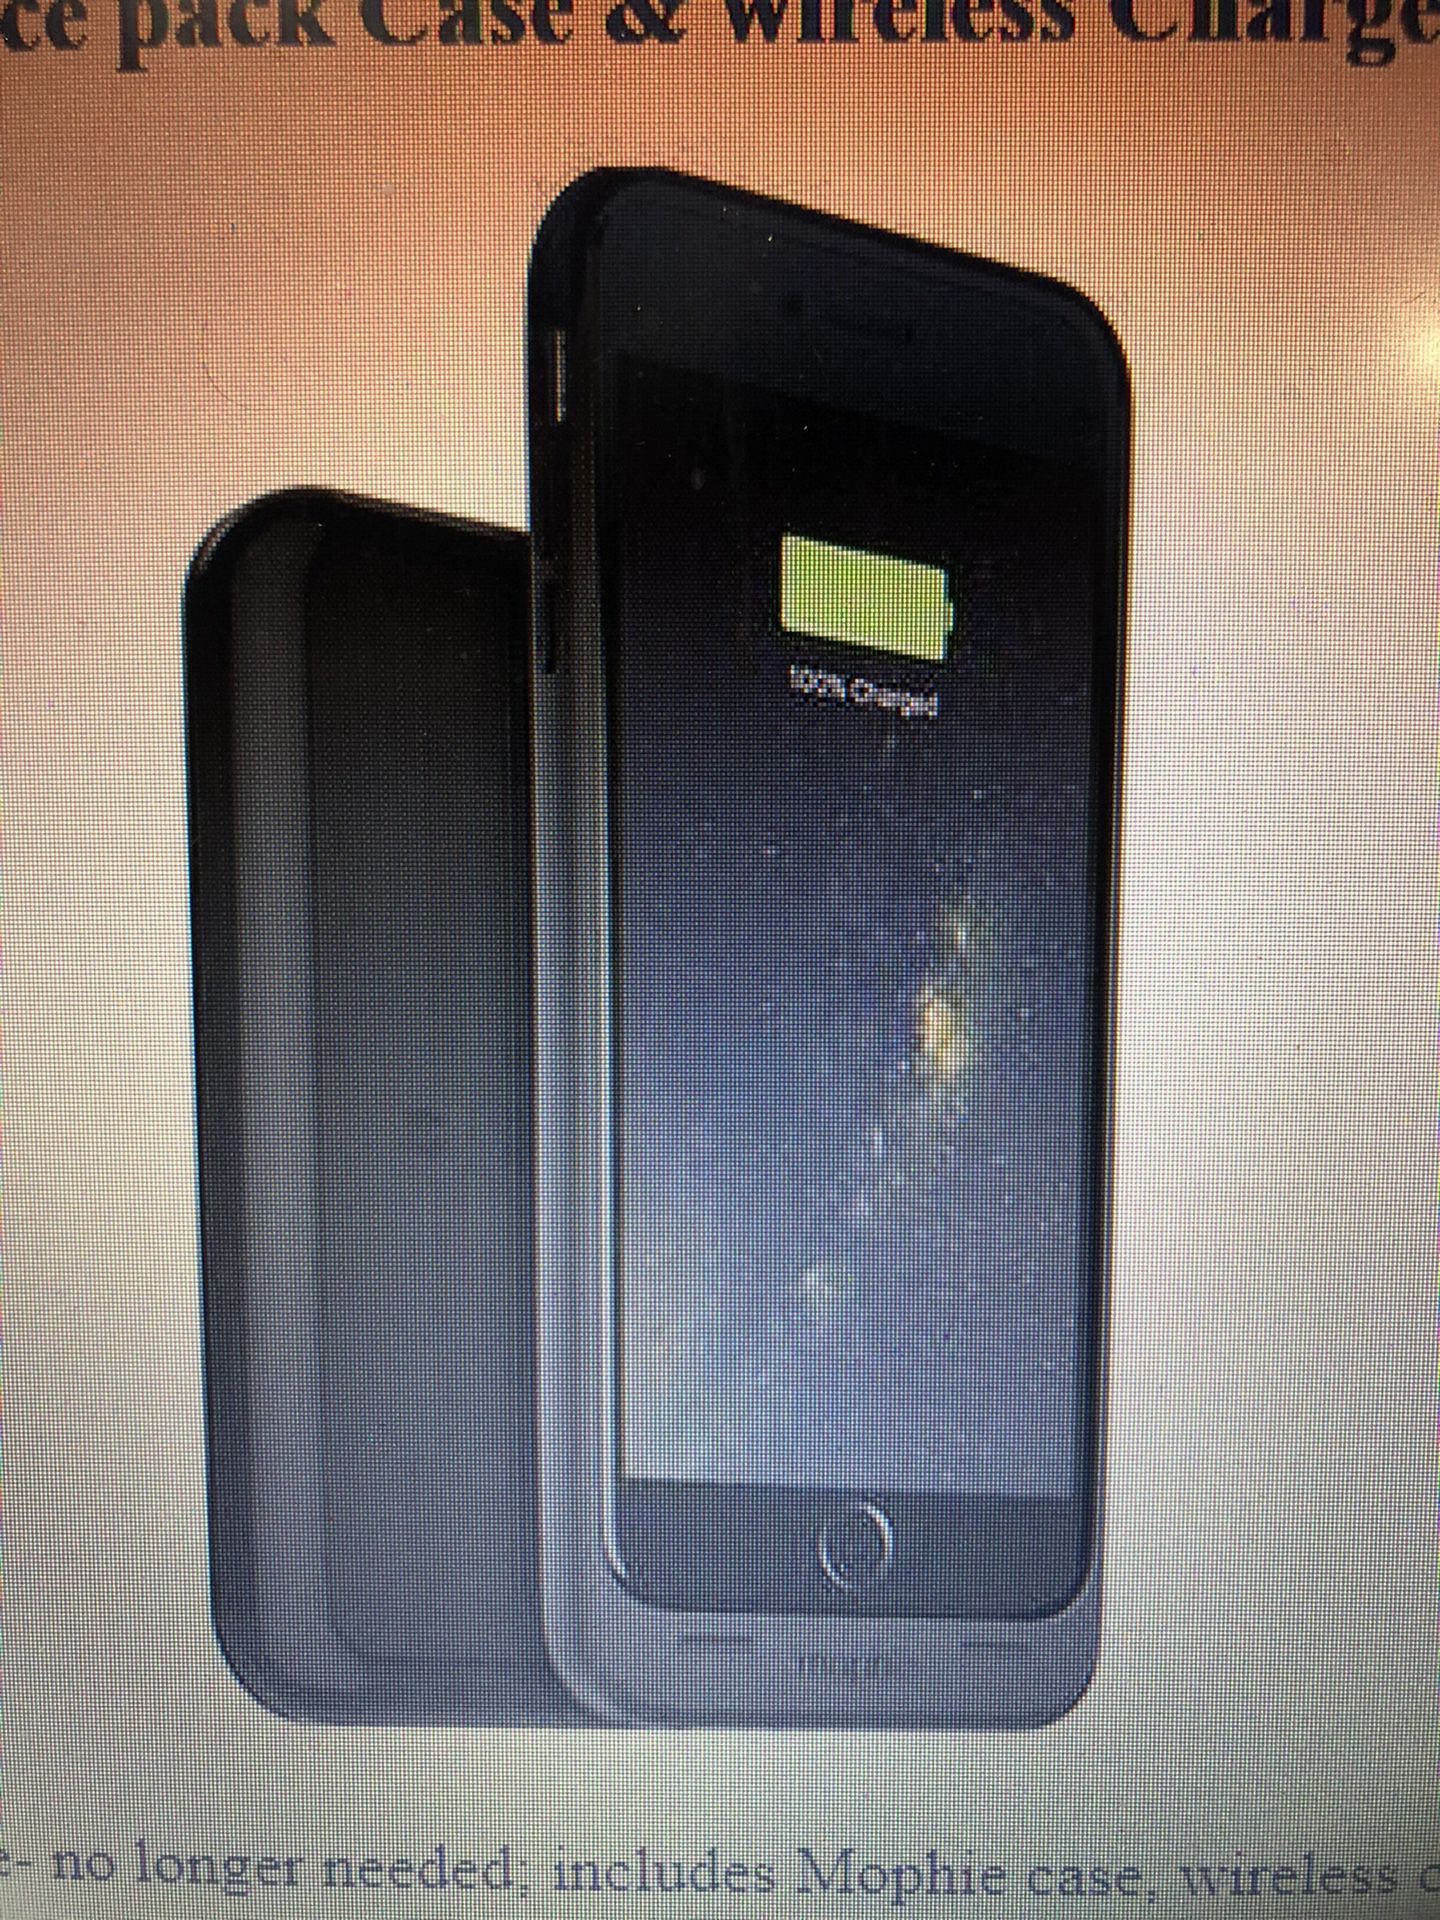 Mophie Juice pack Case and Wireless Charger baseforiPhone 6/6s Plus